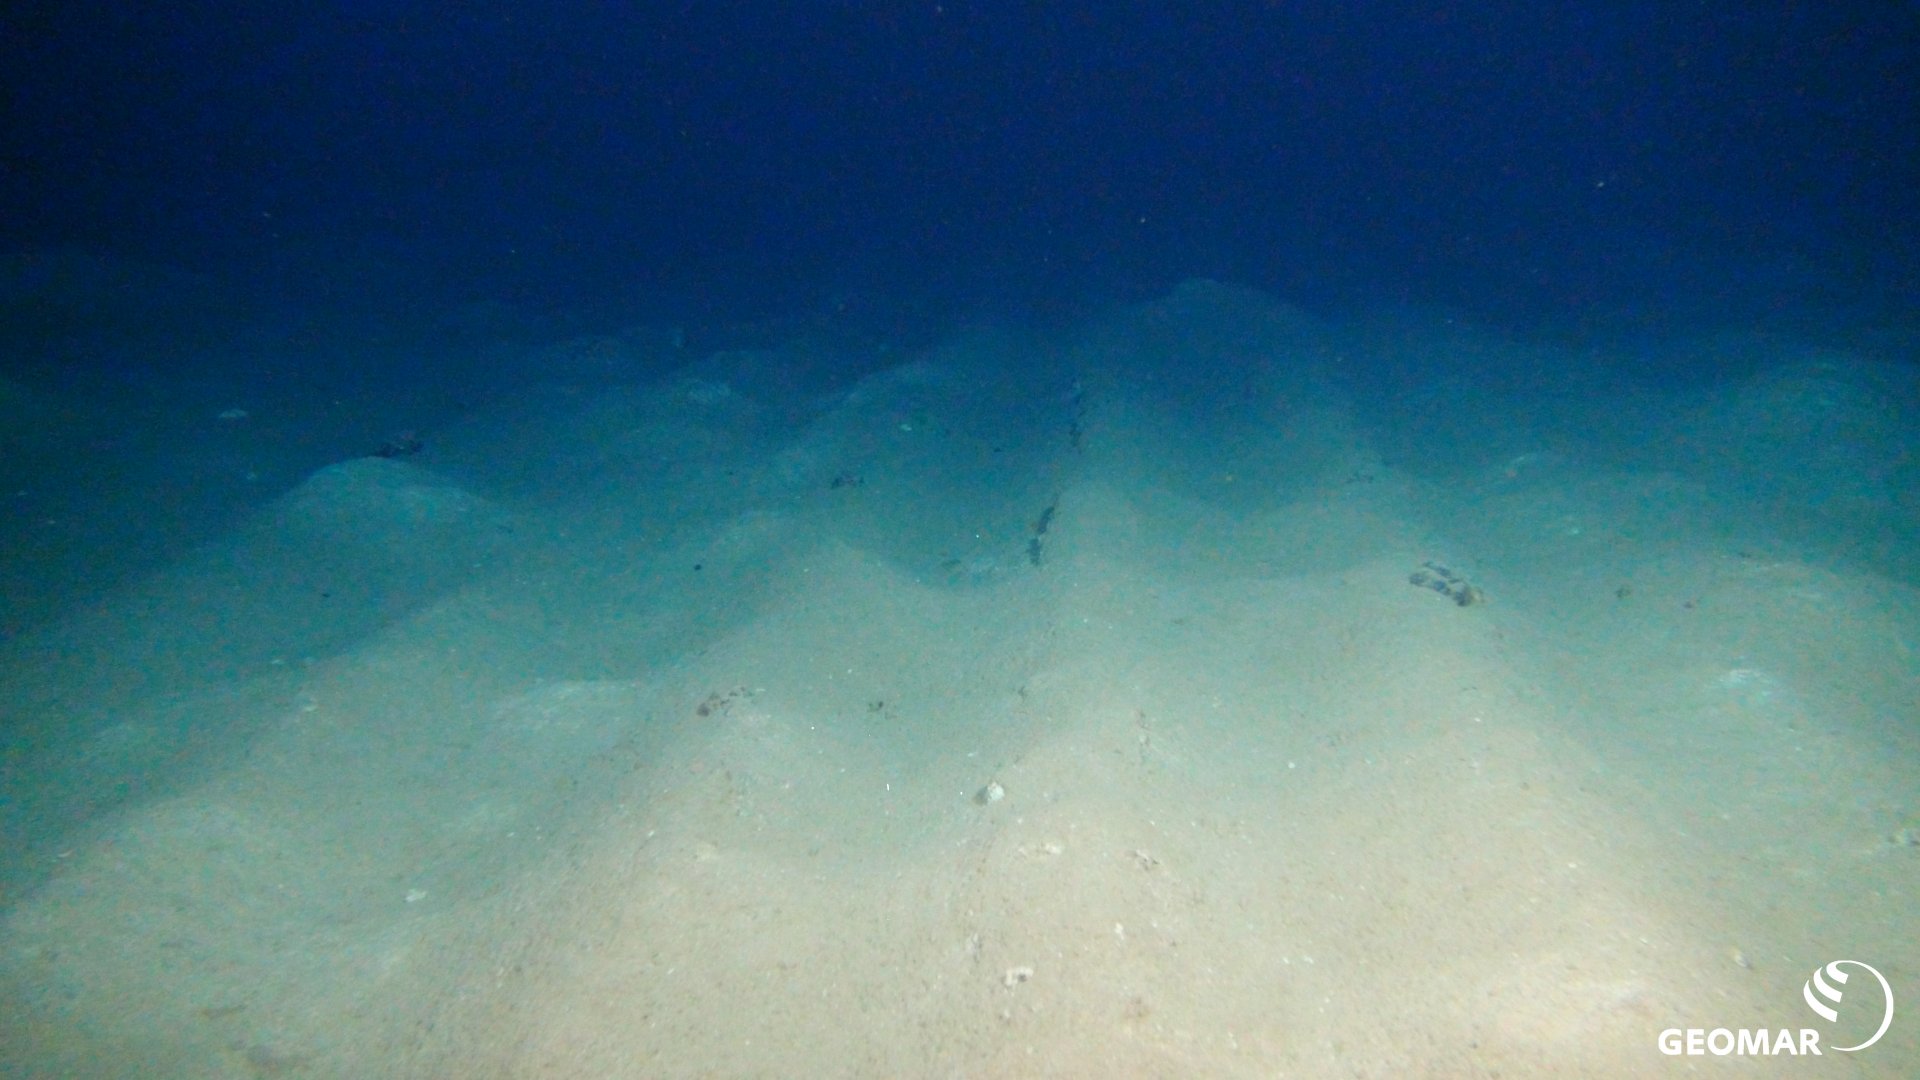 The plough tracks in which the manganese nodules were ploughed under and the sediments disturbed are still clearly visible after 26 years. (Source: ROV-Team/GEOMAR)